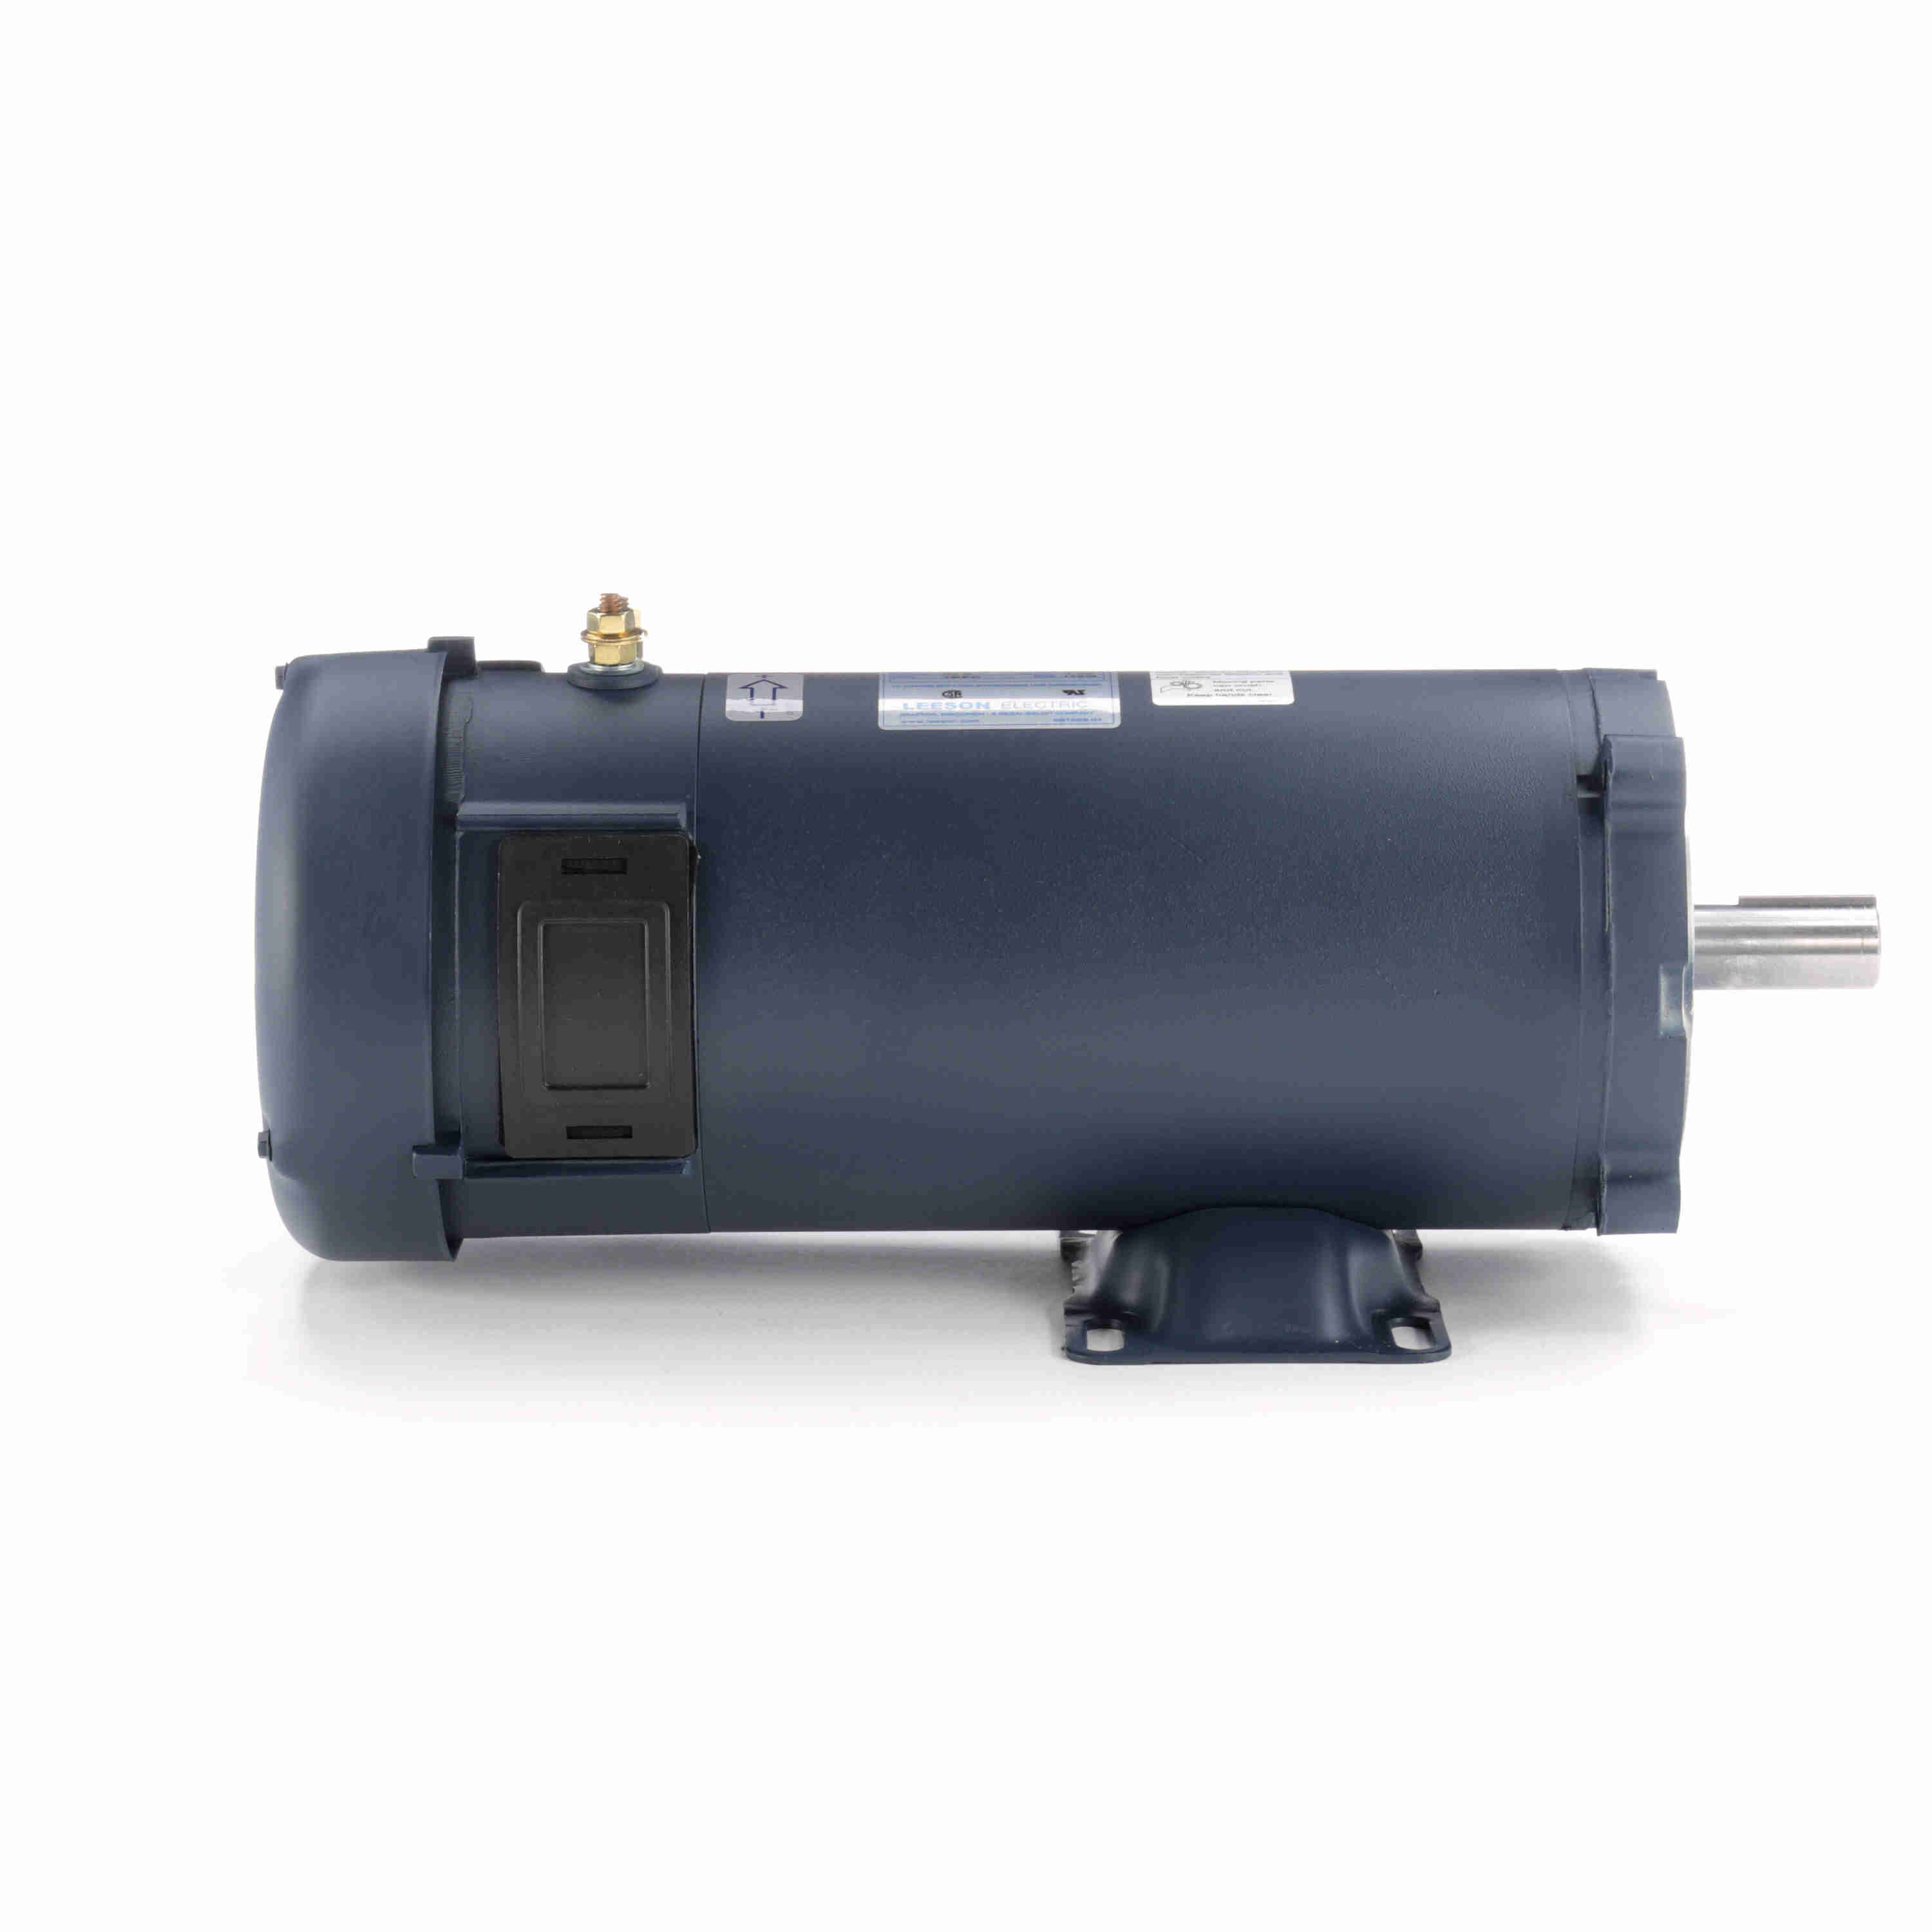 109104.00 Leeson 1.5HP Low Voltage DC Electric Motor, 1800RPM 3